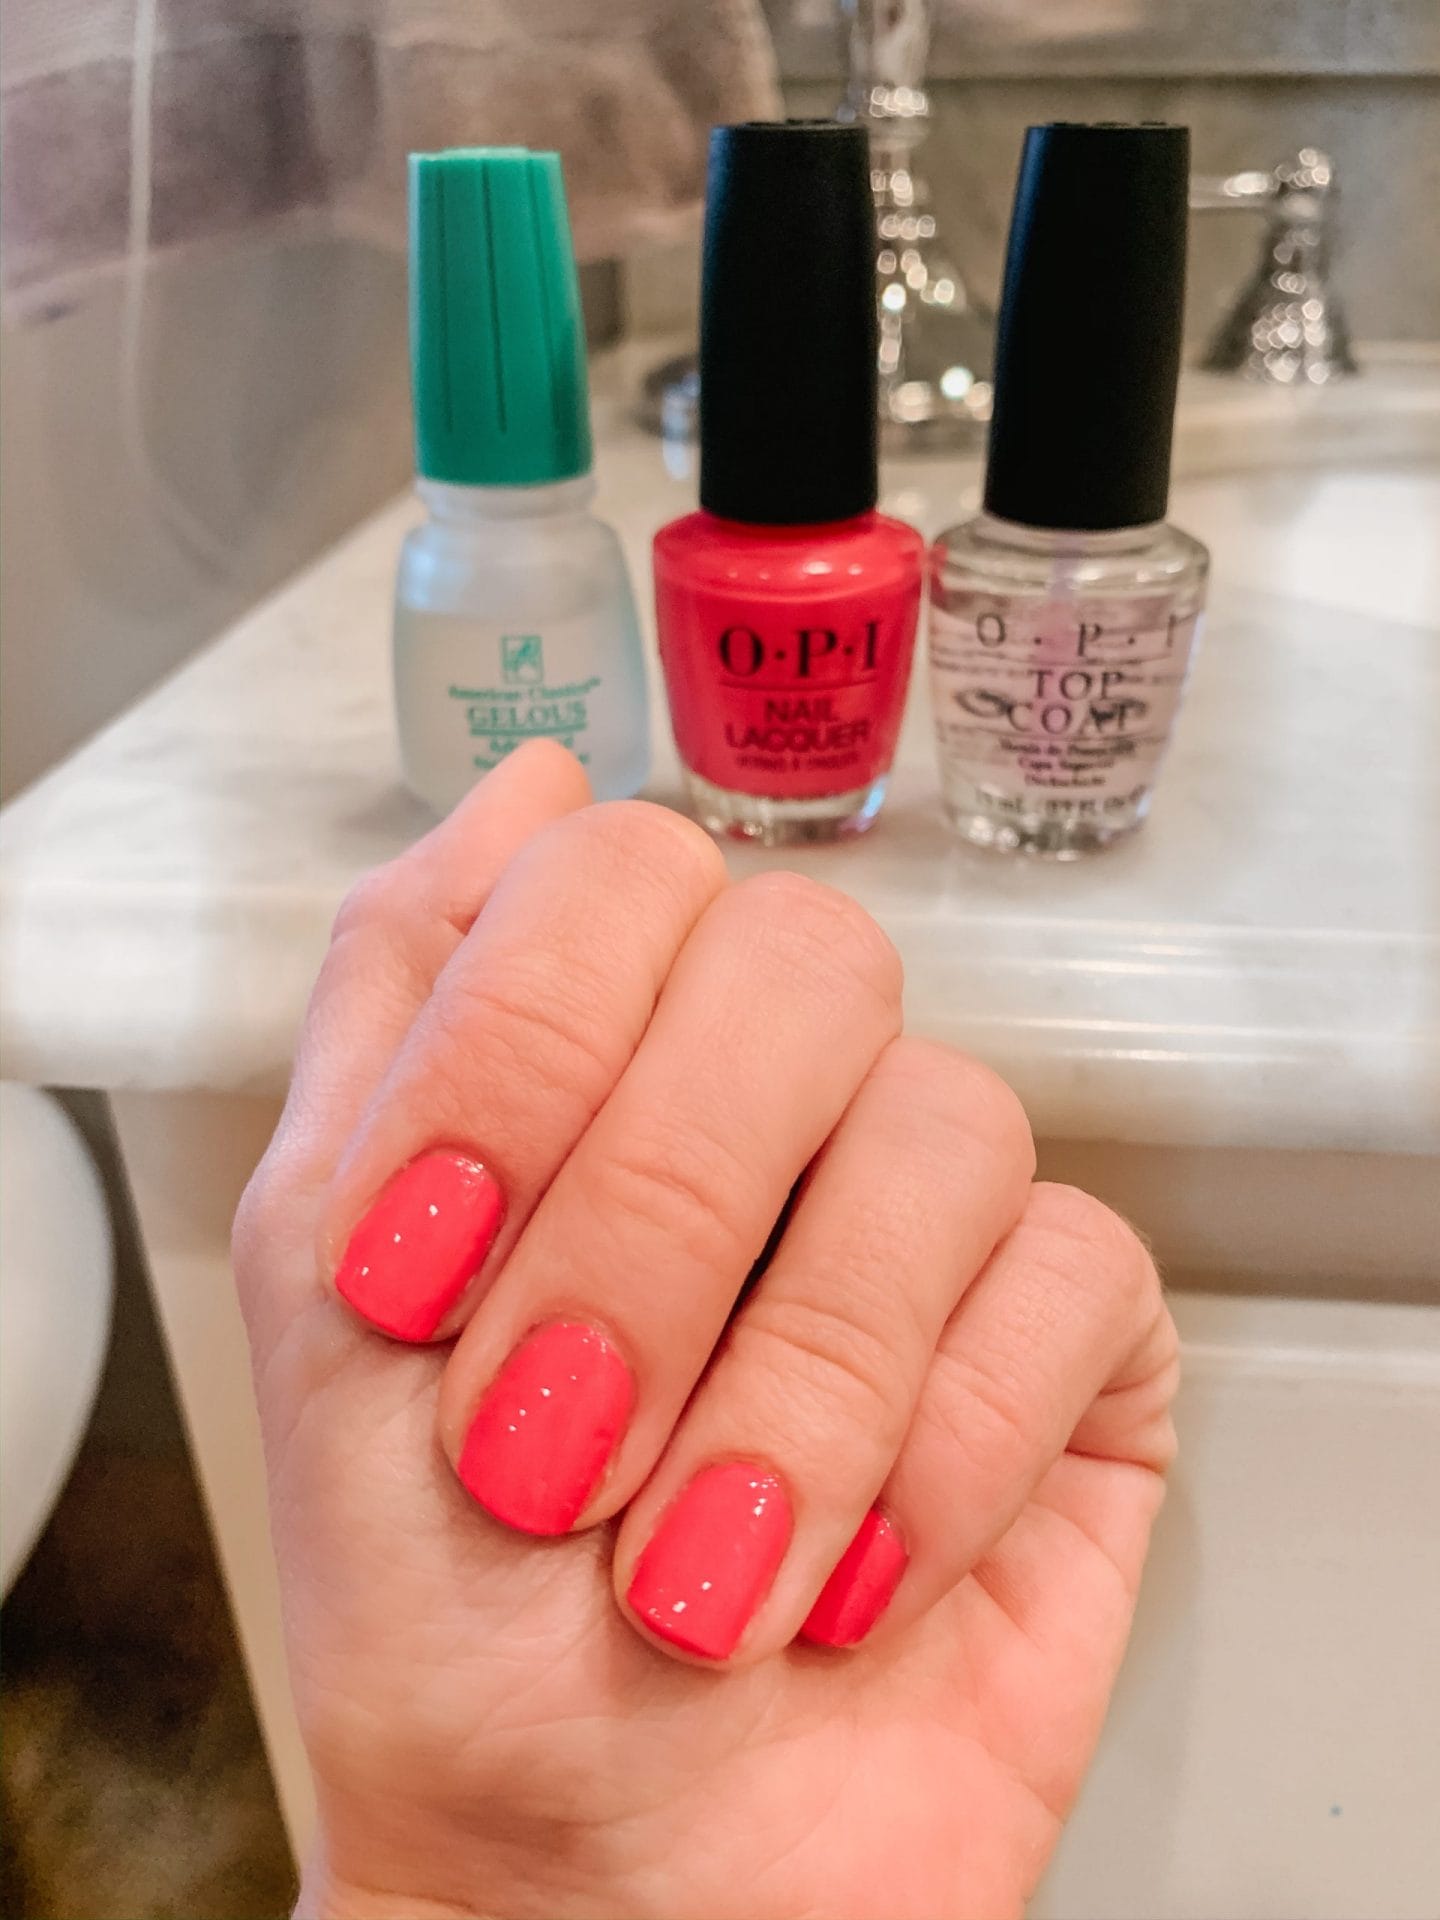 What happens if you use gel polish without UV?